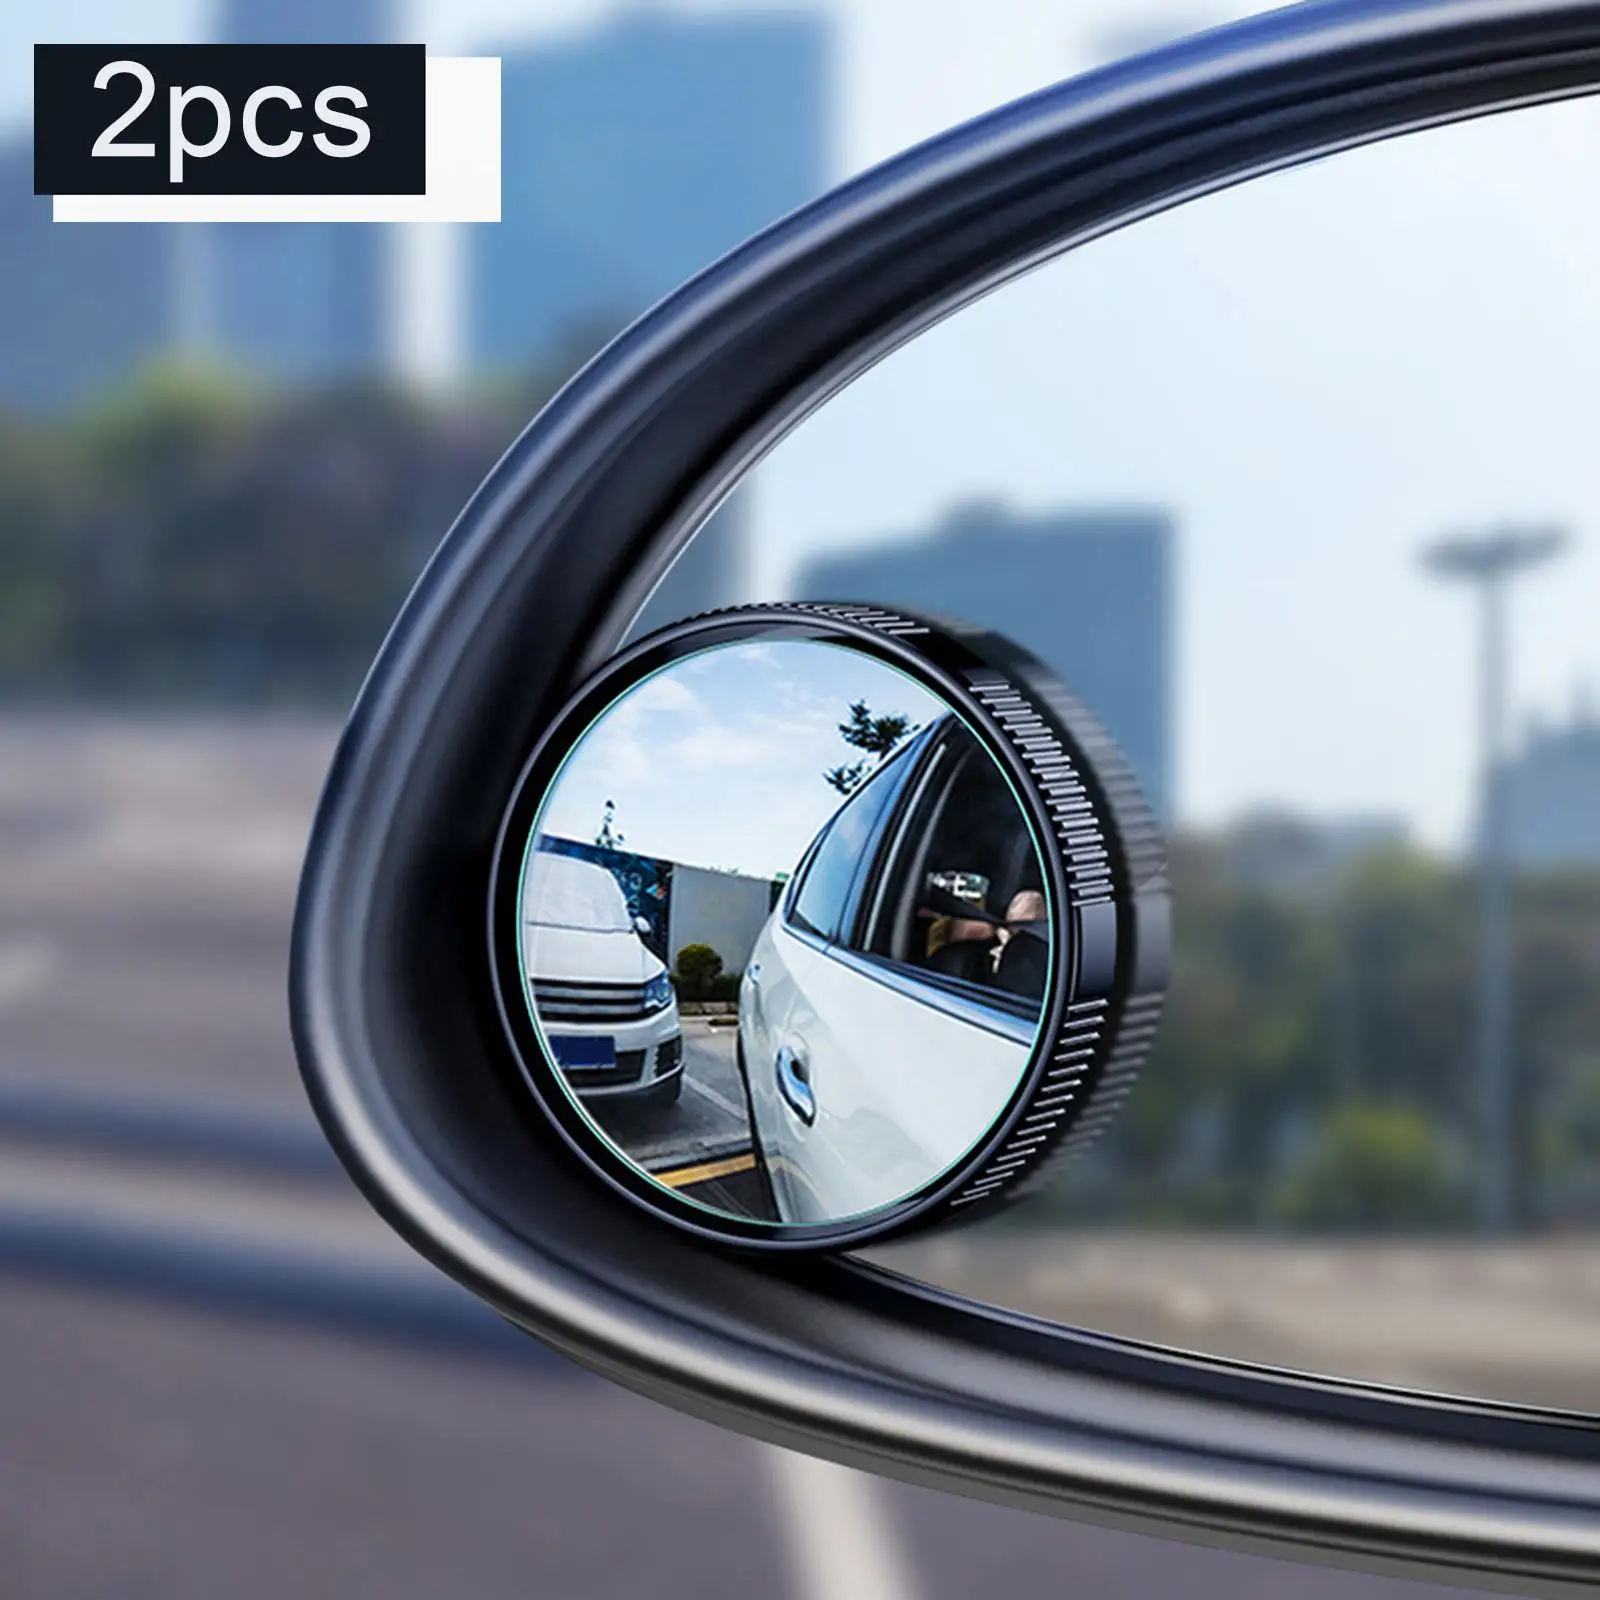 2Pcs Blind Spot Mirrors Adjustable ABS Housing for Cars Motorcycles SUV